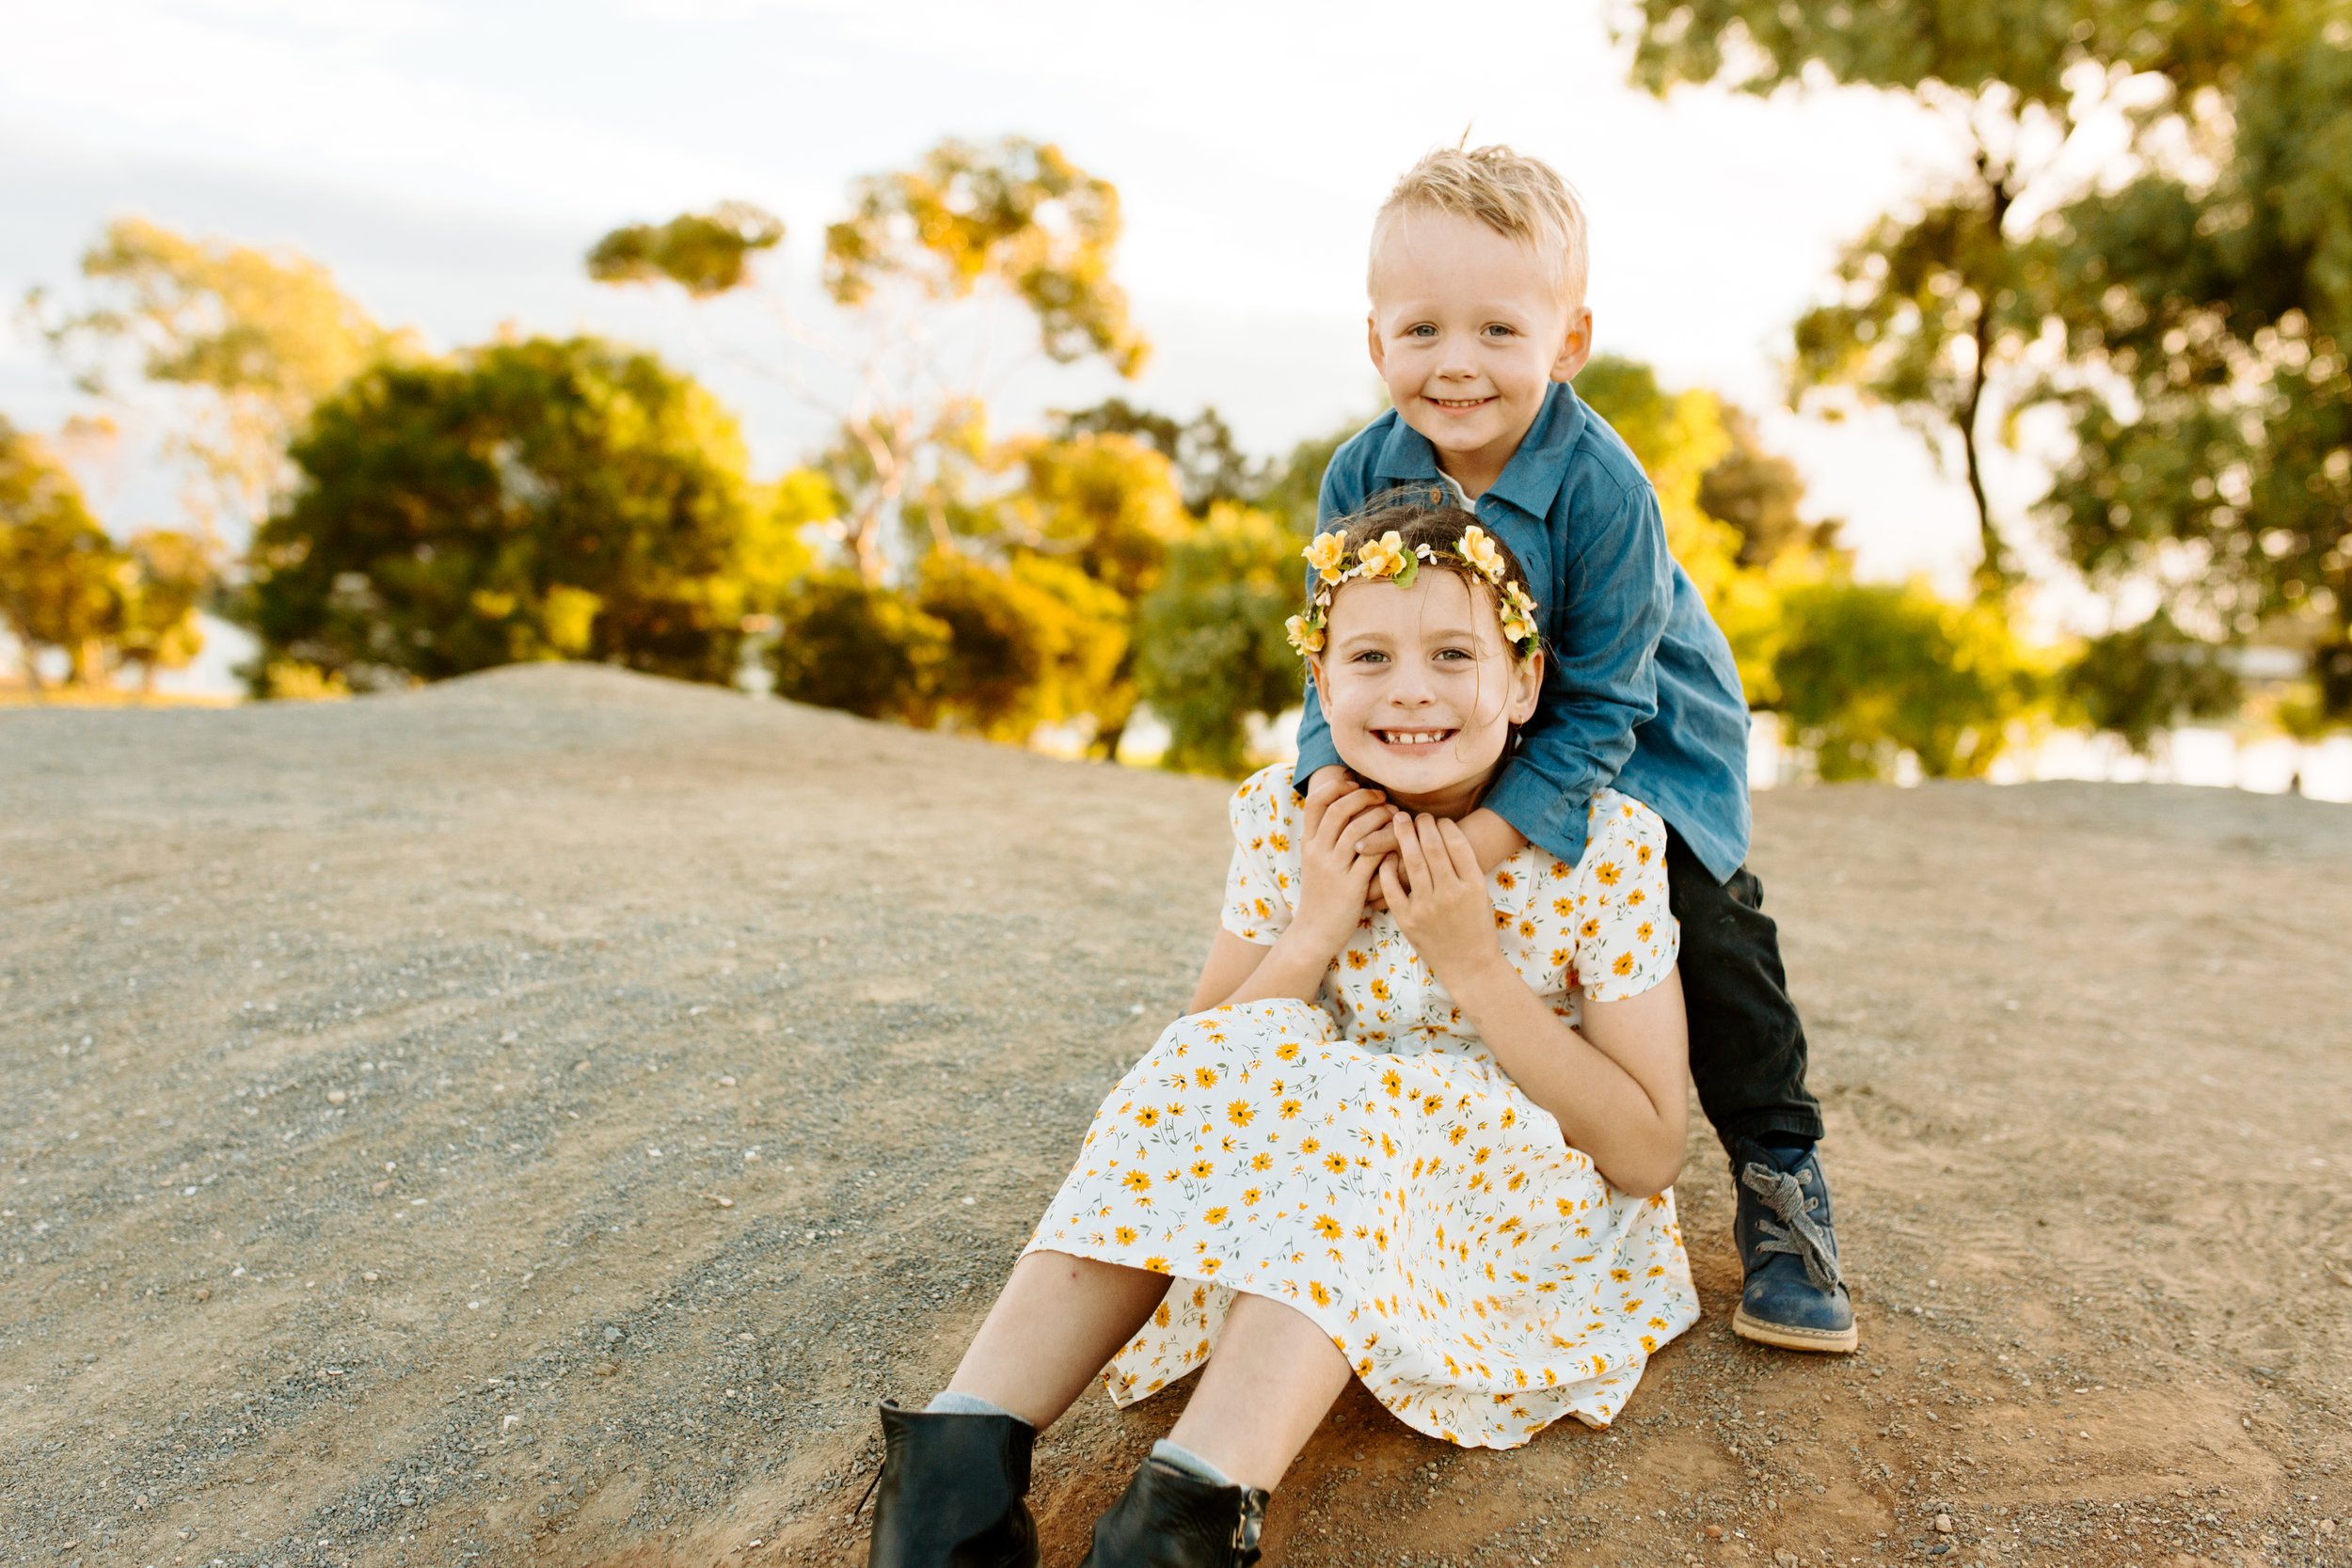 fam wedding weddings family families child children pregnancy newborn baby new baby pregnant adelaide south australia candid fun happy bright colourful married engagement engaged proposal propose ring_031.jpg